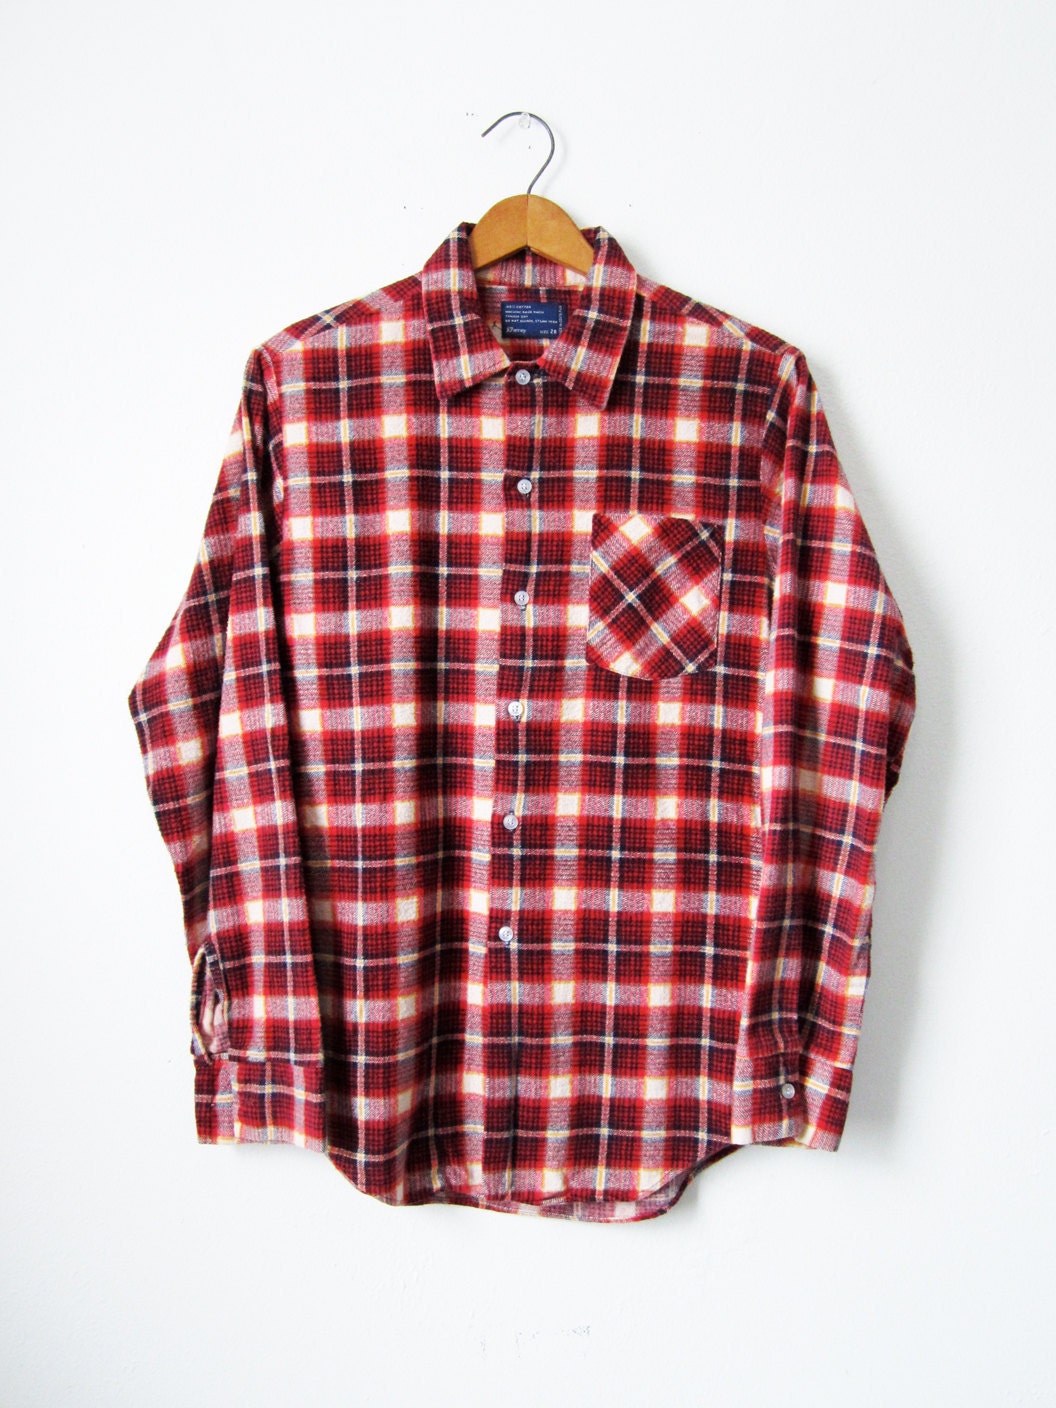 Vintage Flannel Shirt 80s Red Plaid JCPenney Mens Small